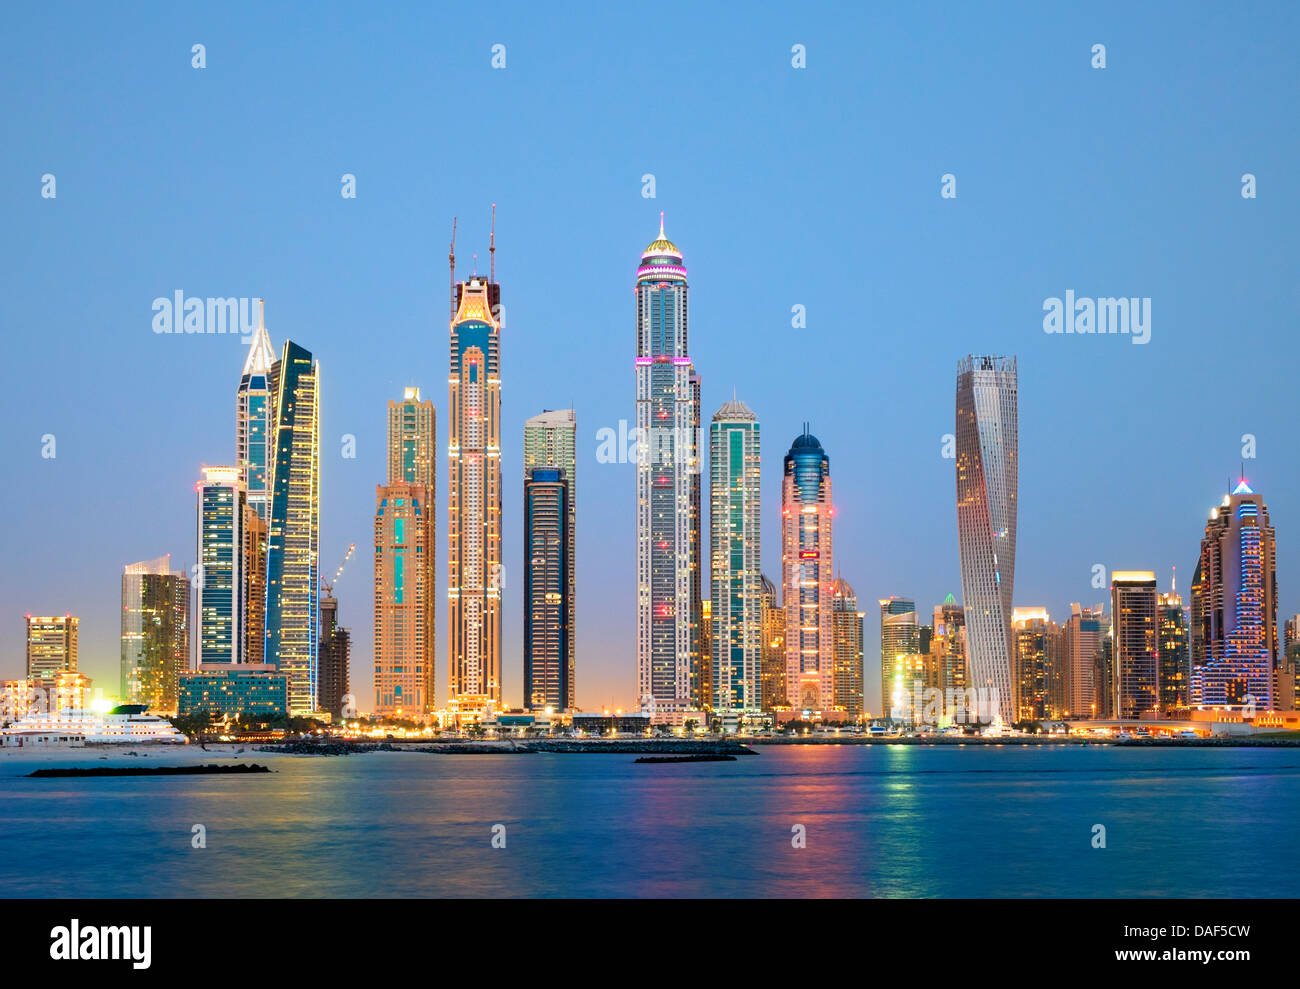 Evening view of Dubai skyline with many skyscrapers at Marina district in United Arab Emirates UAE Stock Photo